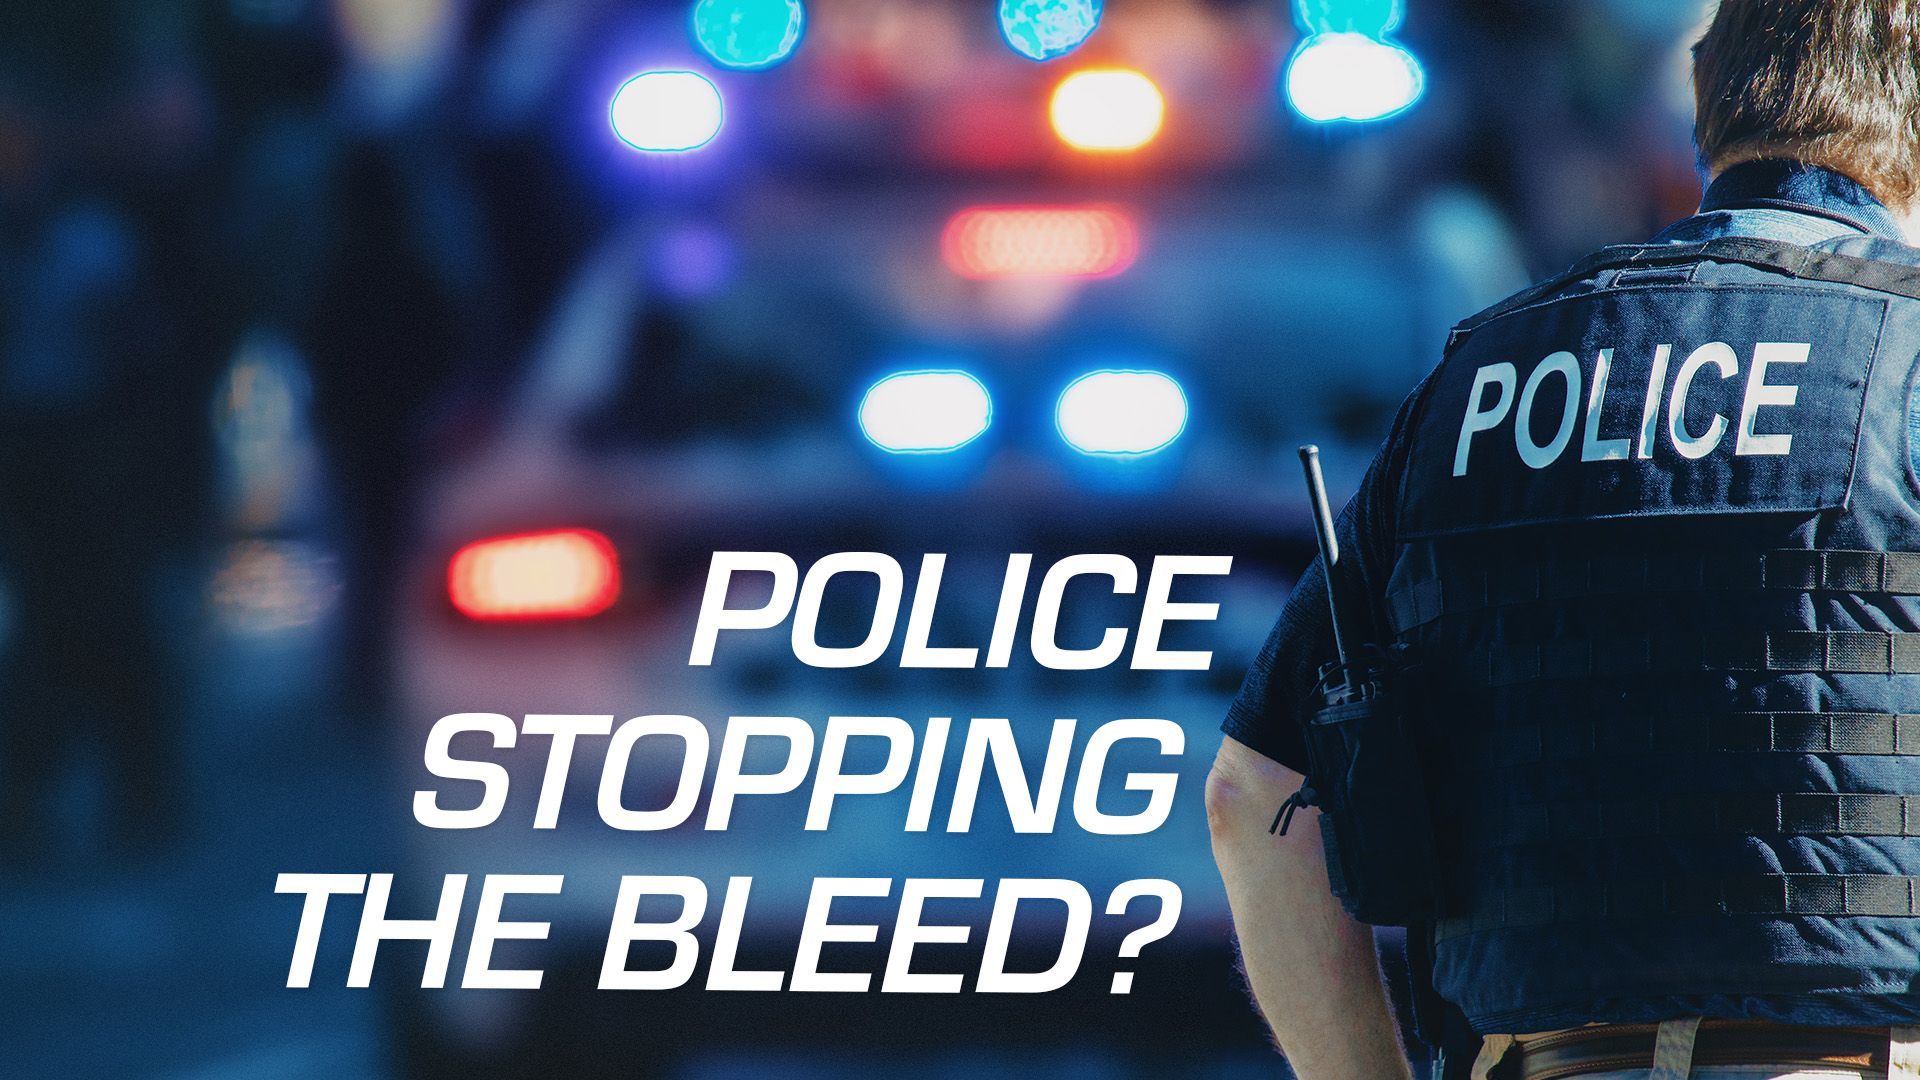 Police Stopping the Bleed?